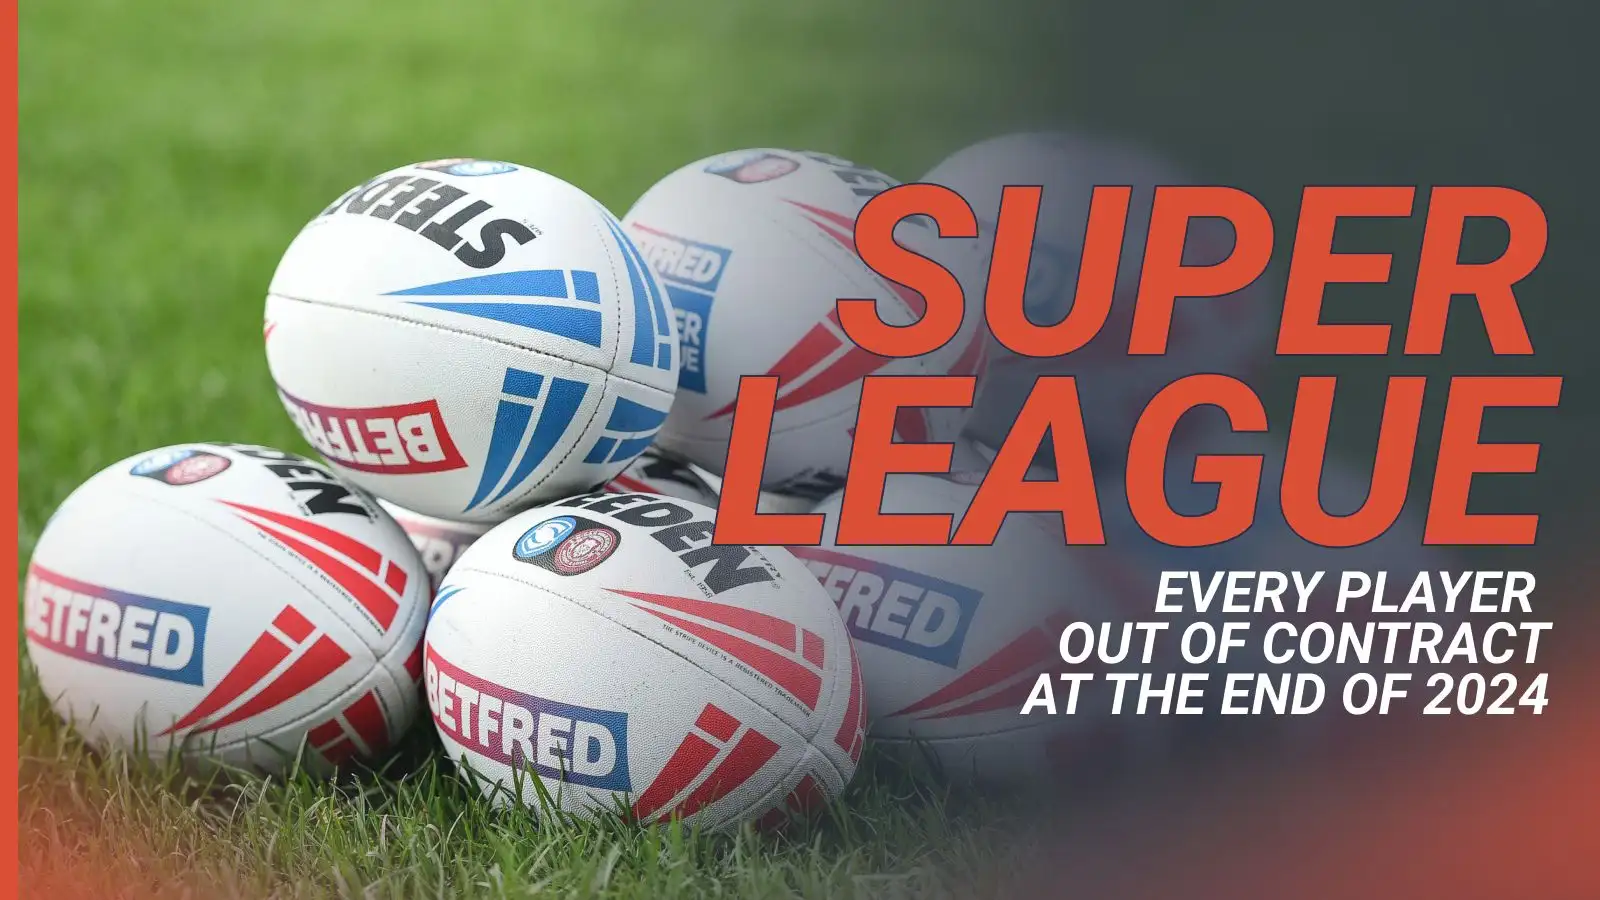 Every Super League player out of contract at the end of 2024 with May 1 transfer deadline gone